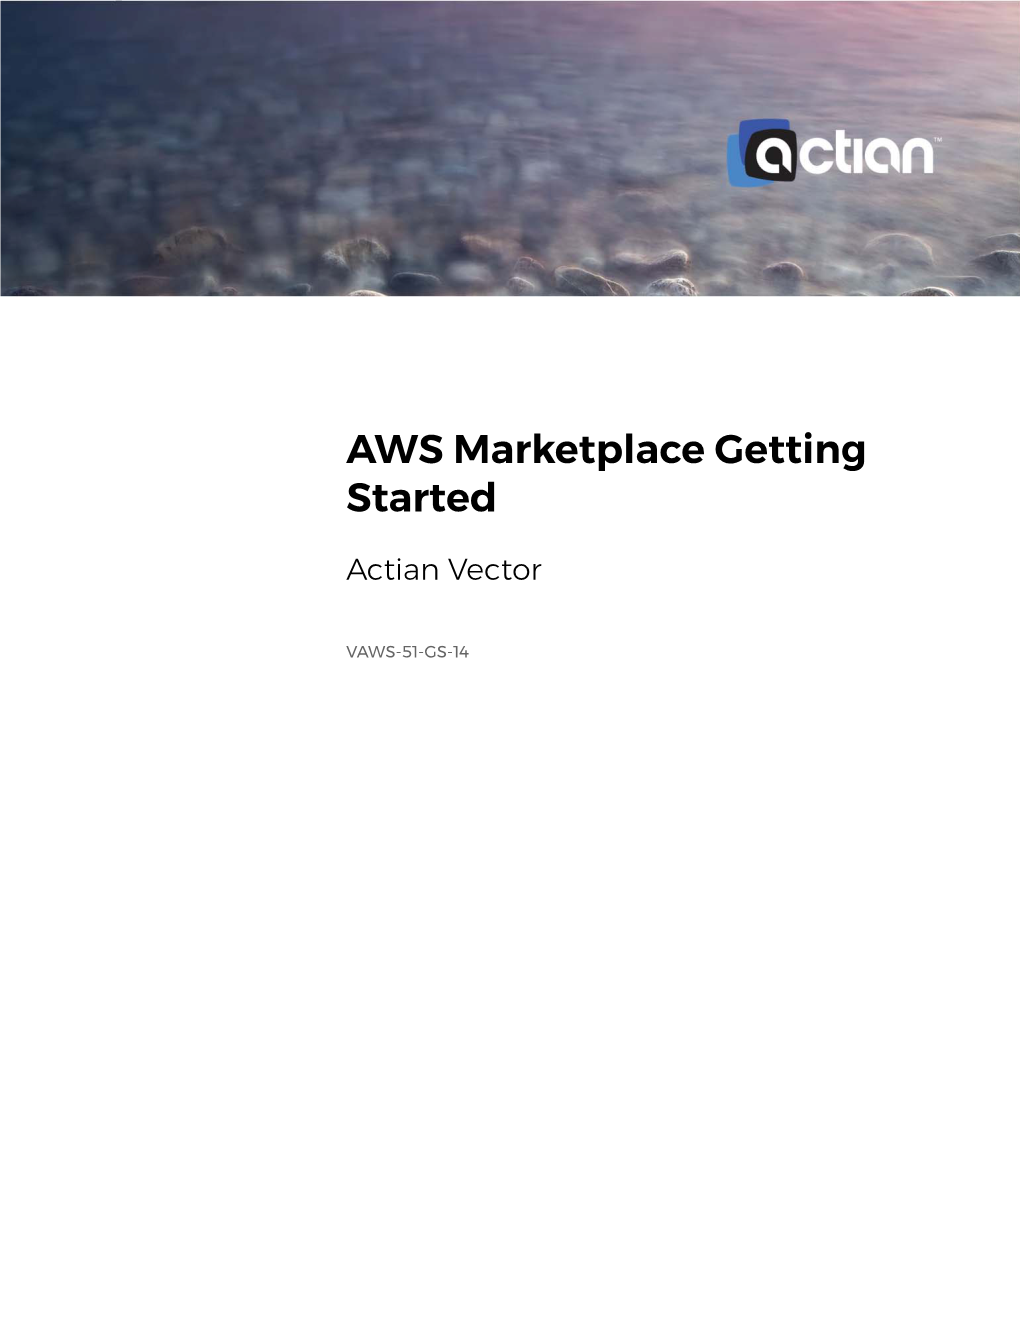 AWS Marketplace Getting Started